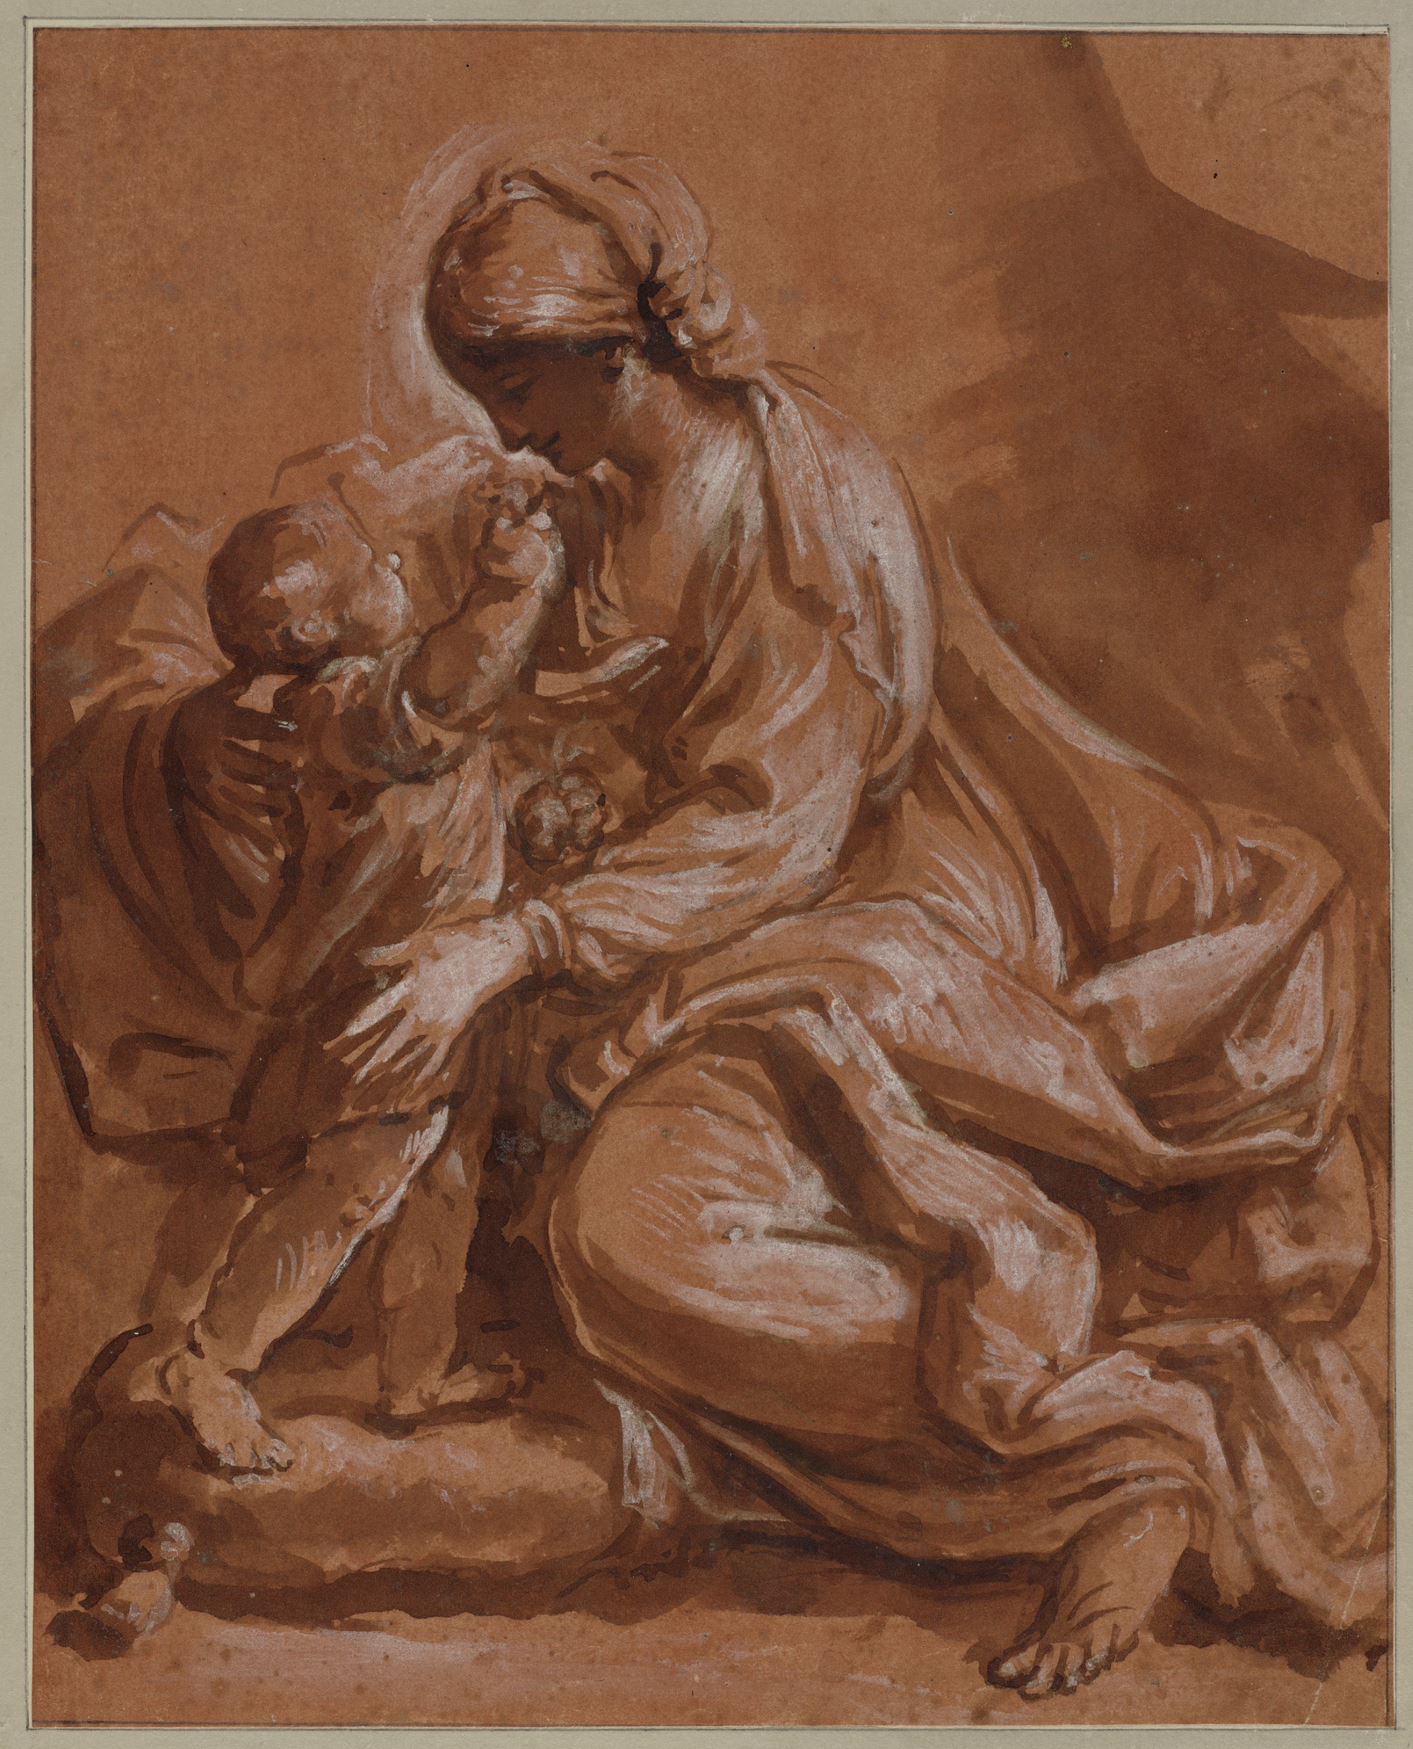 A brown ink drawing on terracotta colored paper with white heightening, the image of the Virgin Mary and Jesus, who appears to be two years old. He stands on a rock to reach up to her, showing her something in his right hand. She embraces him with both arms and looks down at him with motherly love and devotion.